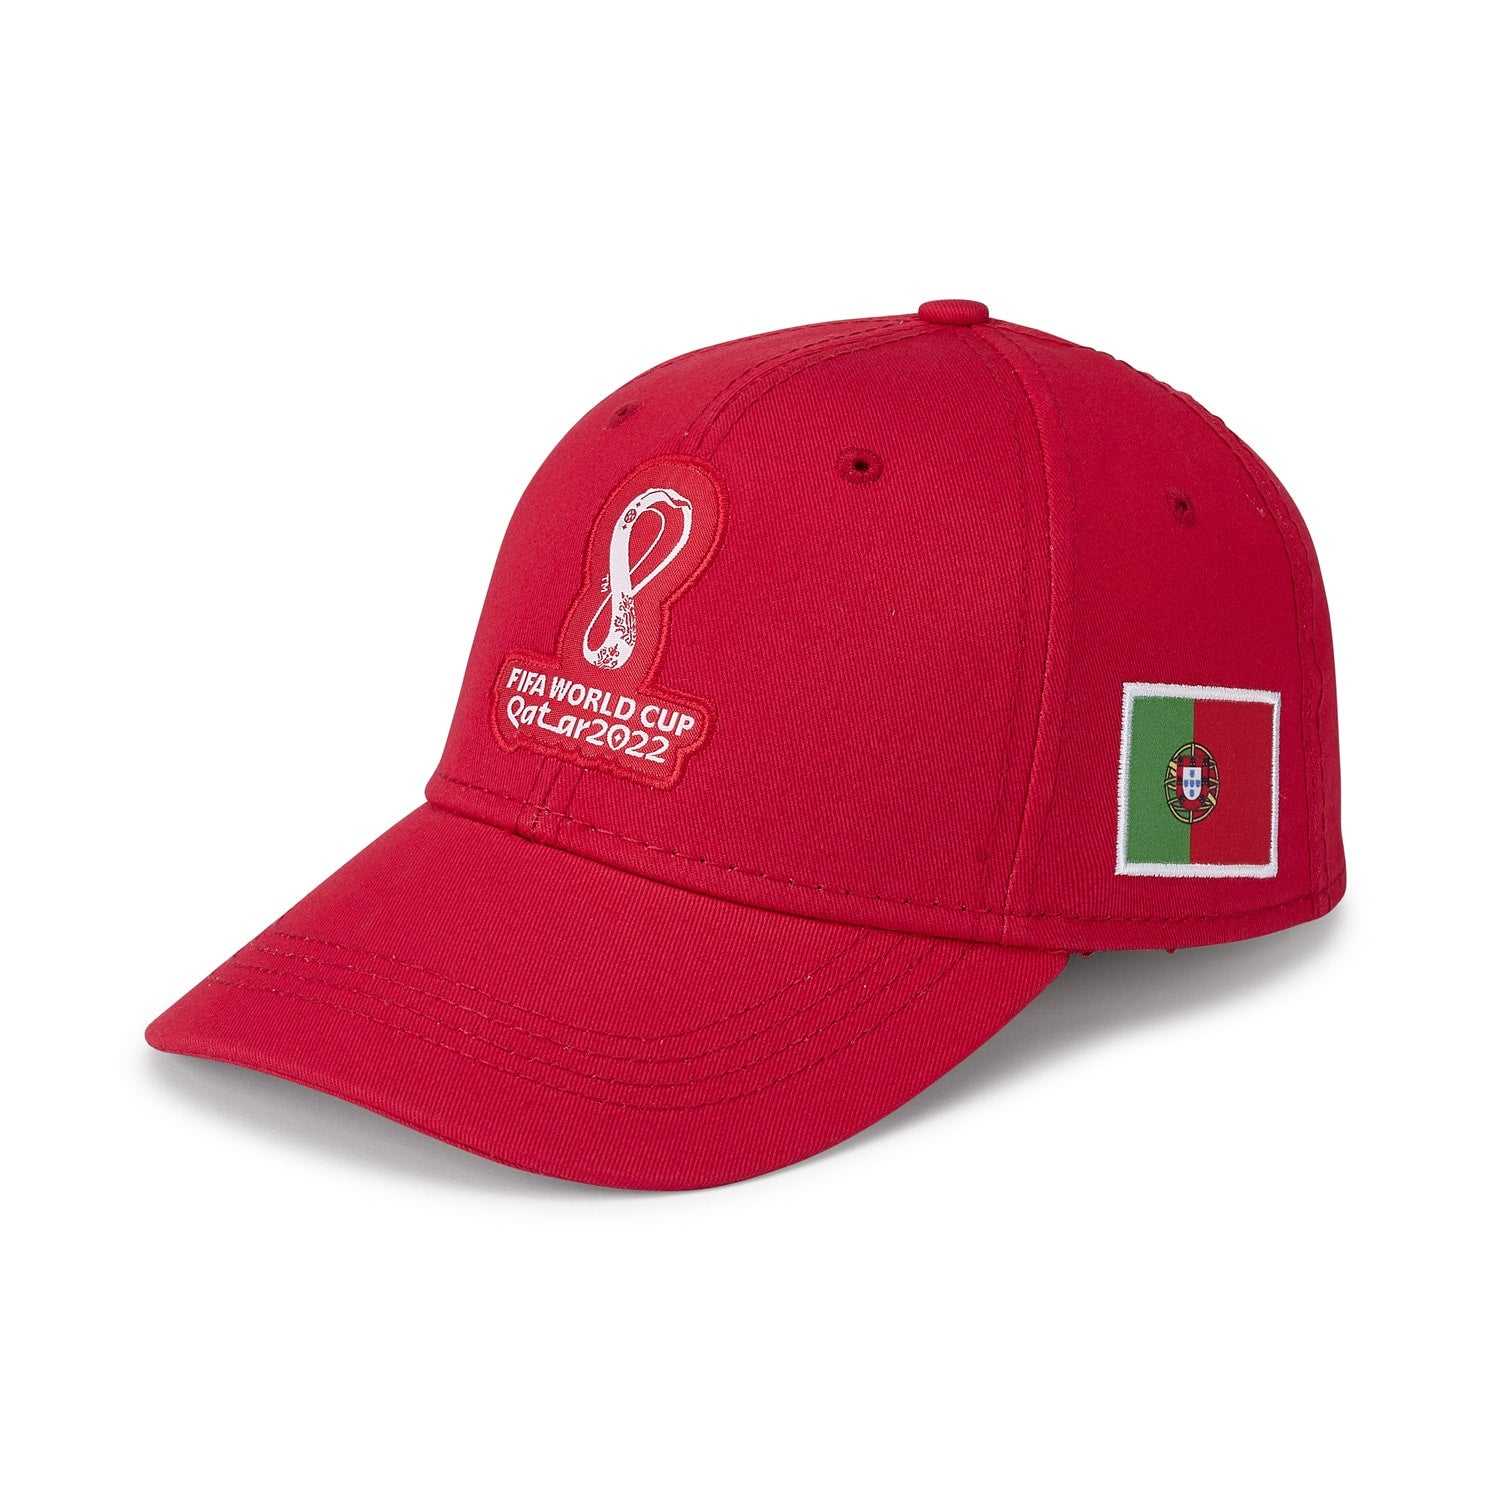 2022 World Cup Portugal Red Cap - Mens